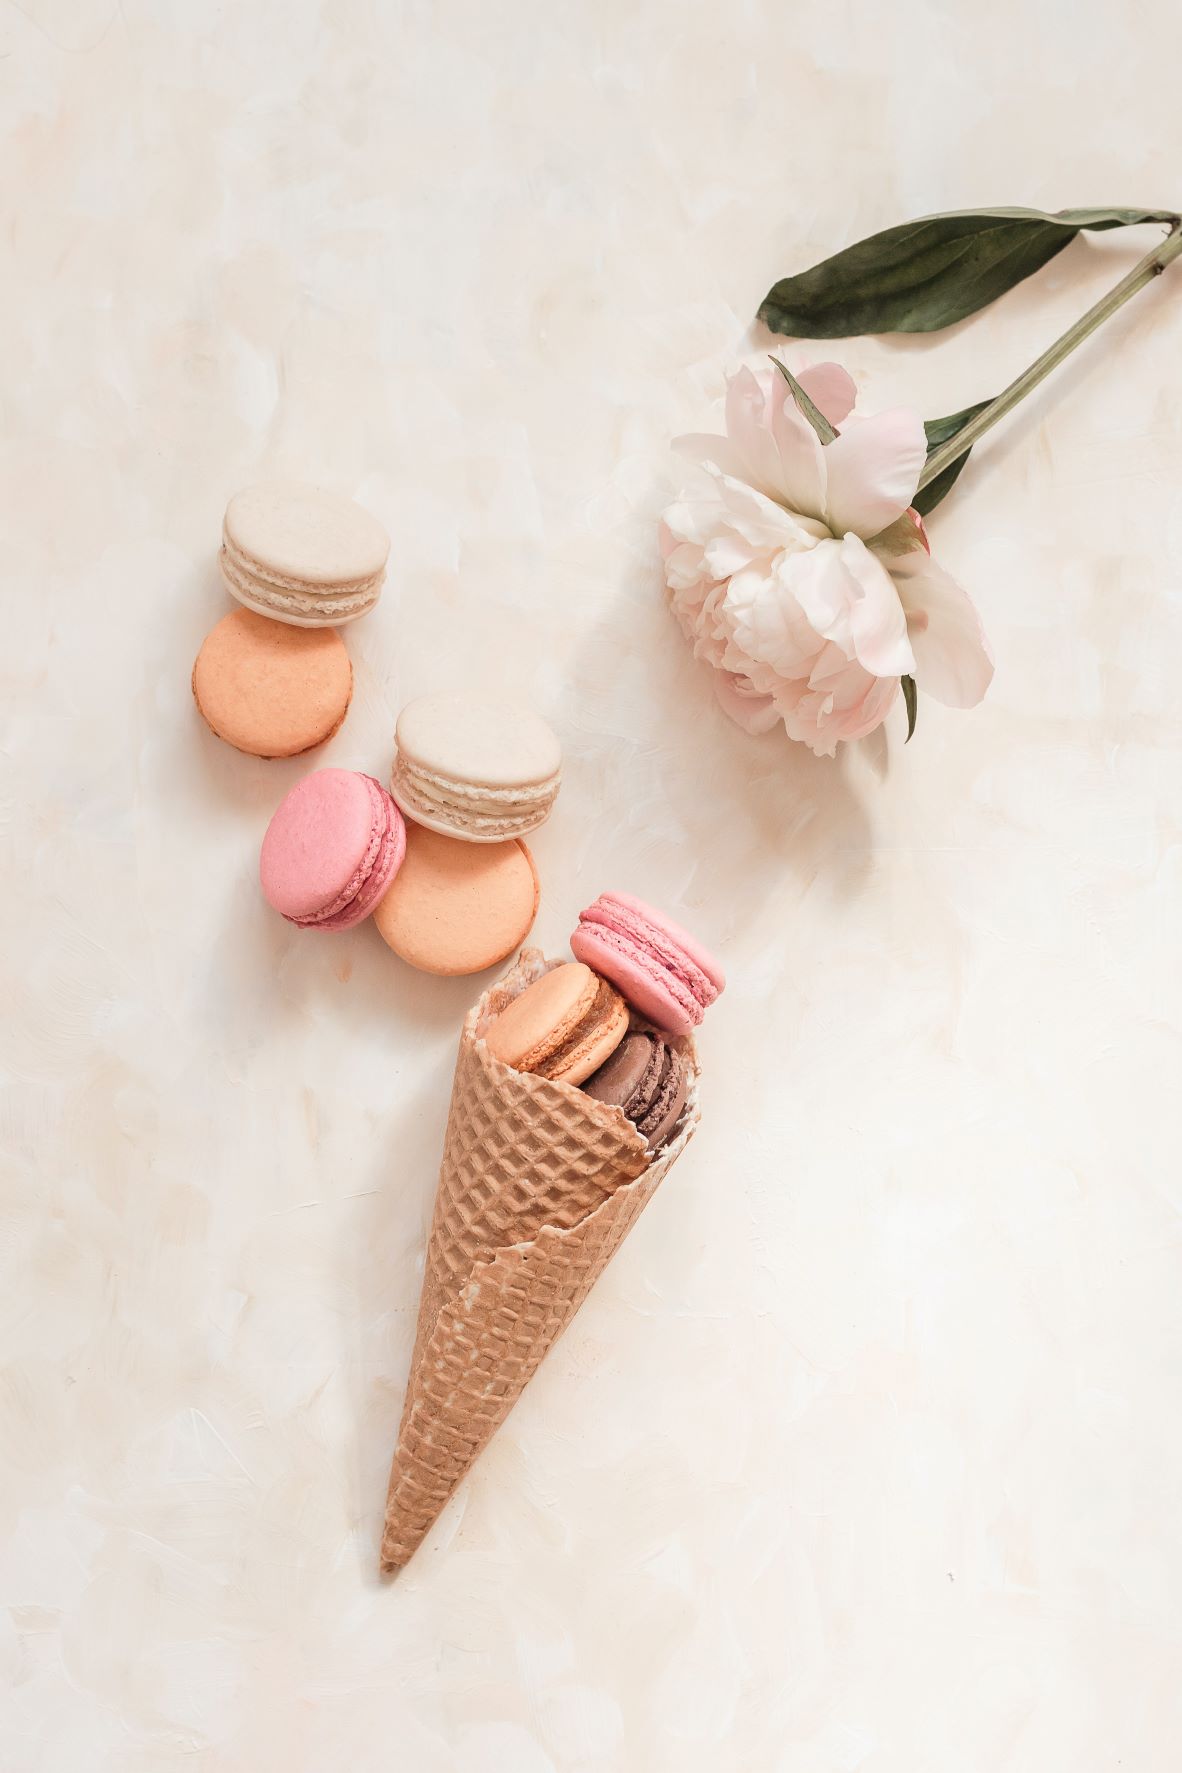 macaroons lay inside a ice cream cone. A fresh white and pink flower lays beside it.